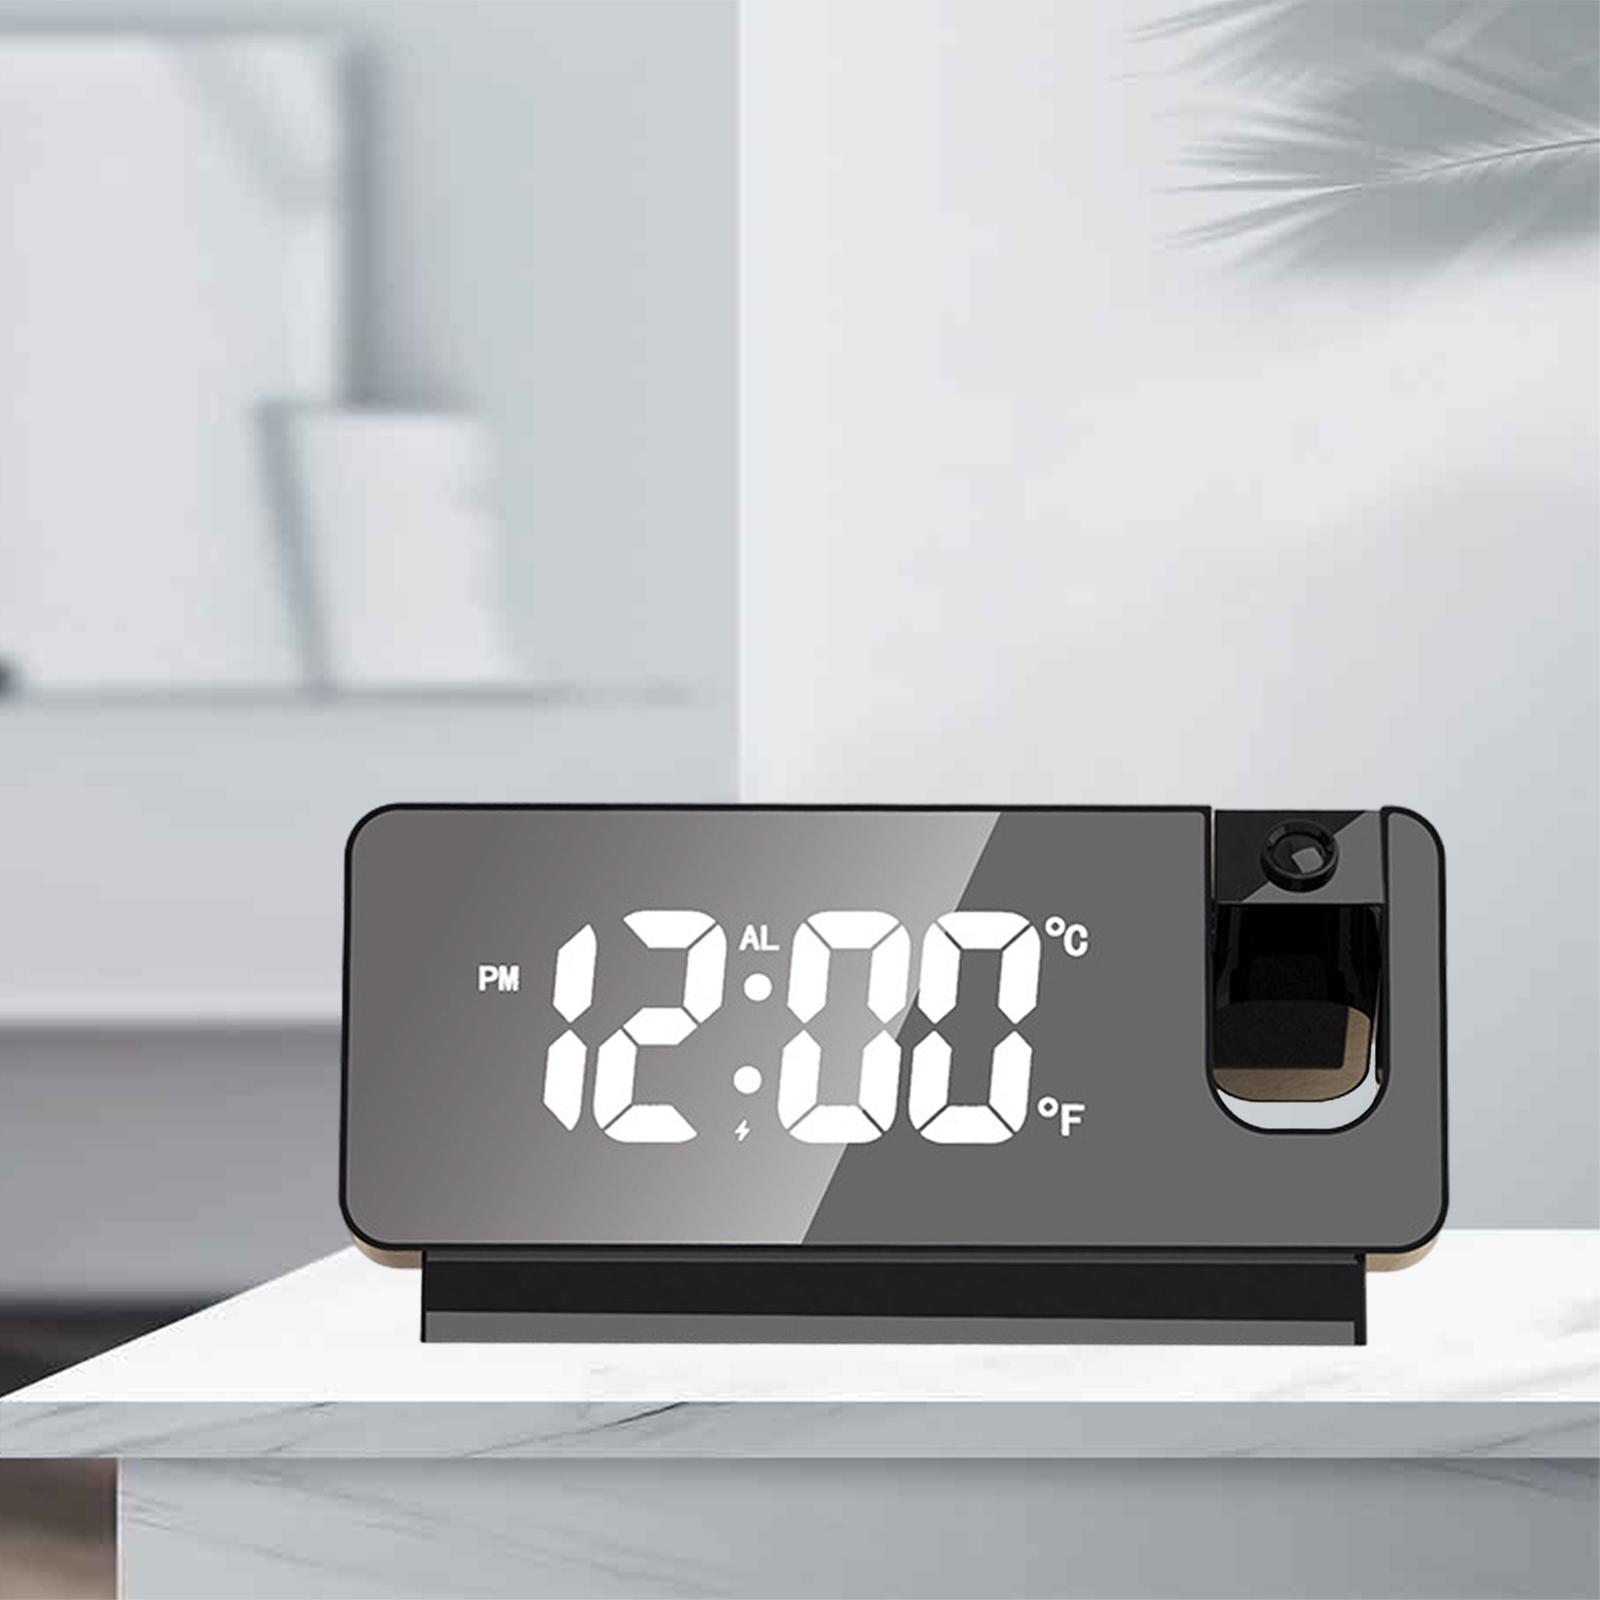 LED Projector Alarm Clock Loud Alarms Wall Ceiling USB Quiet for Students